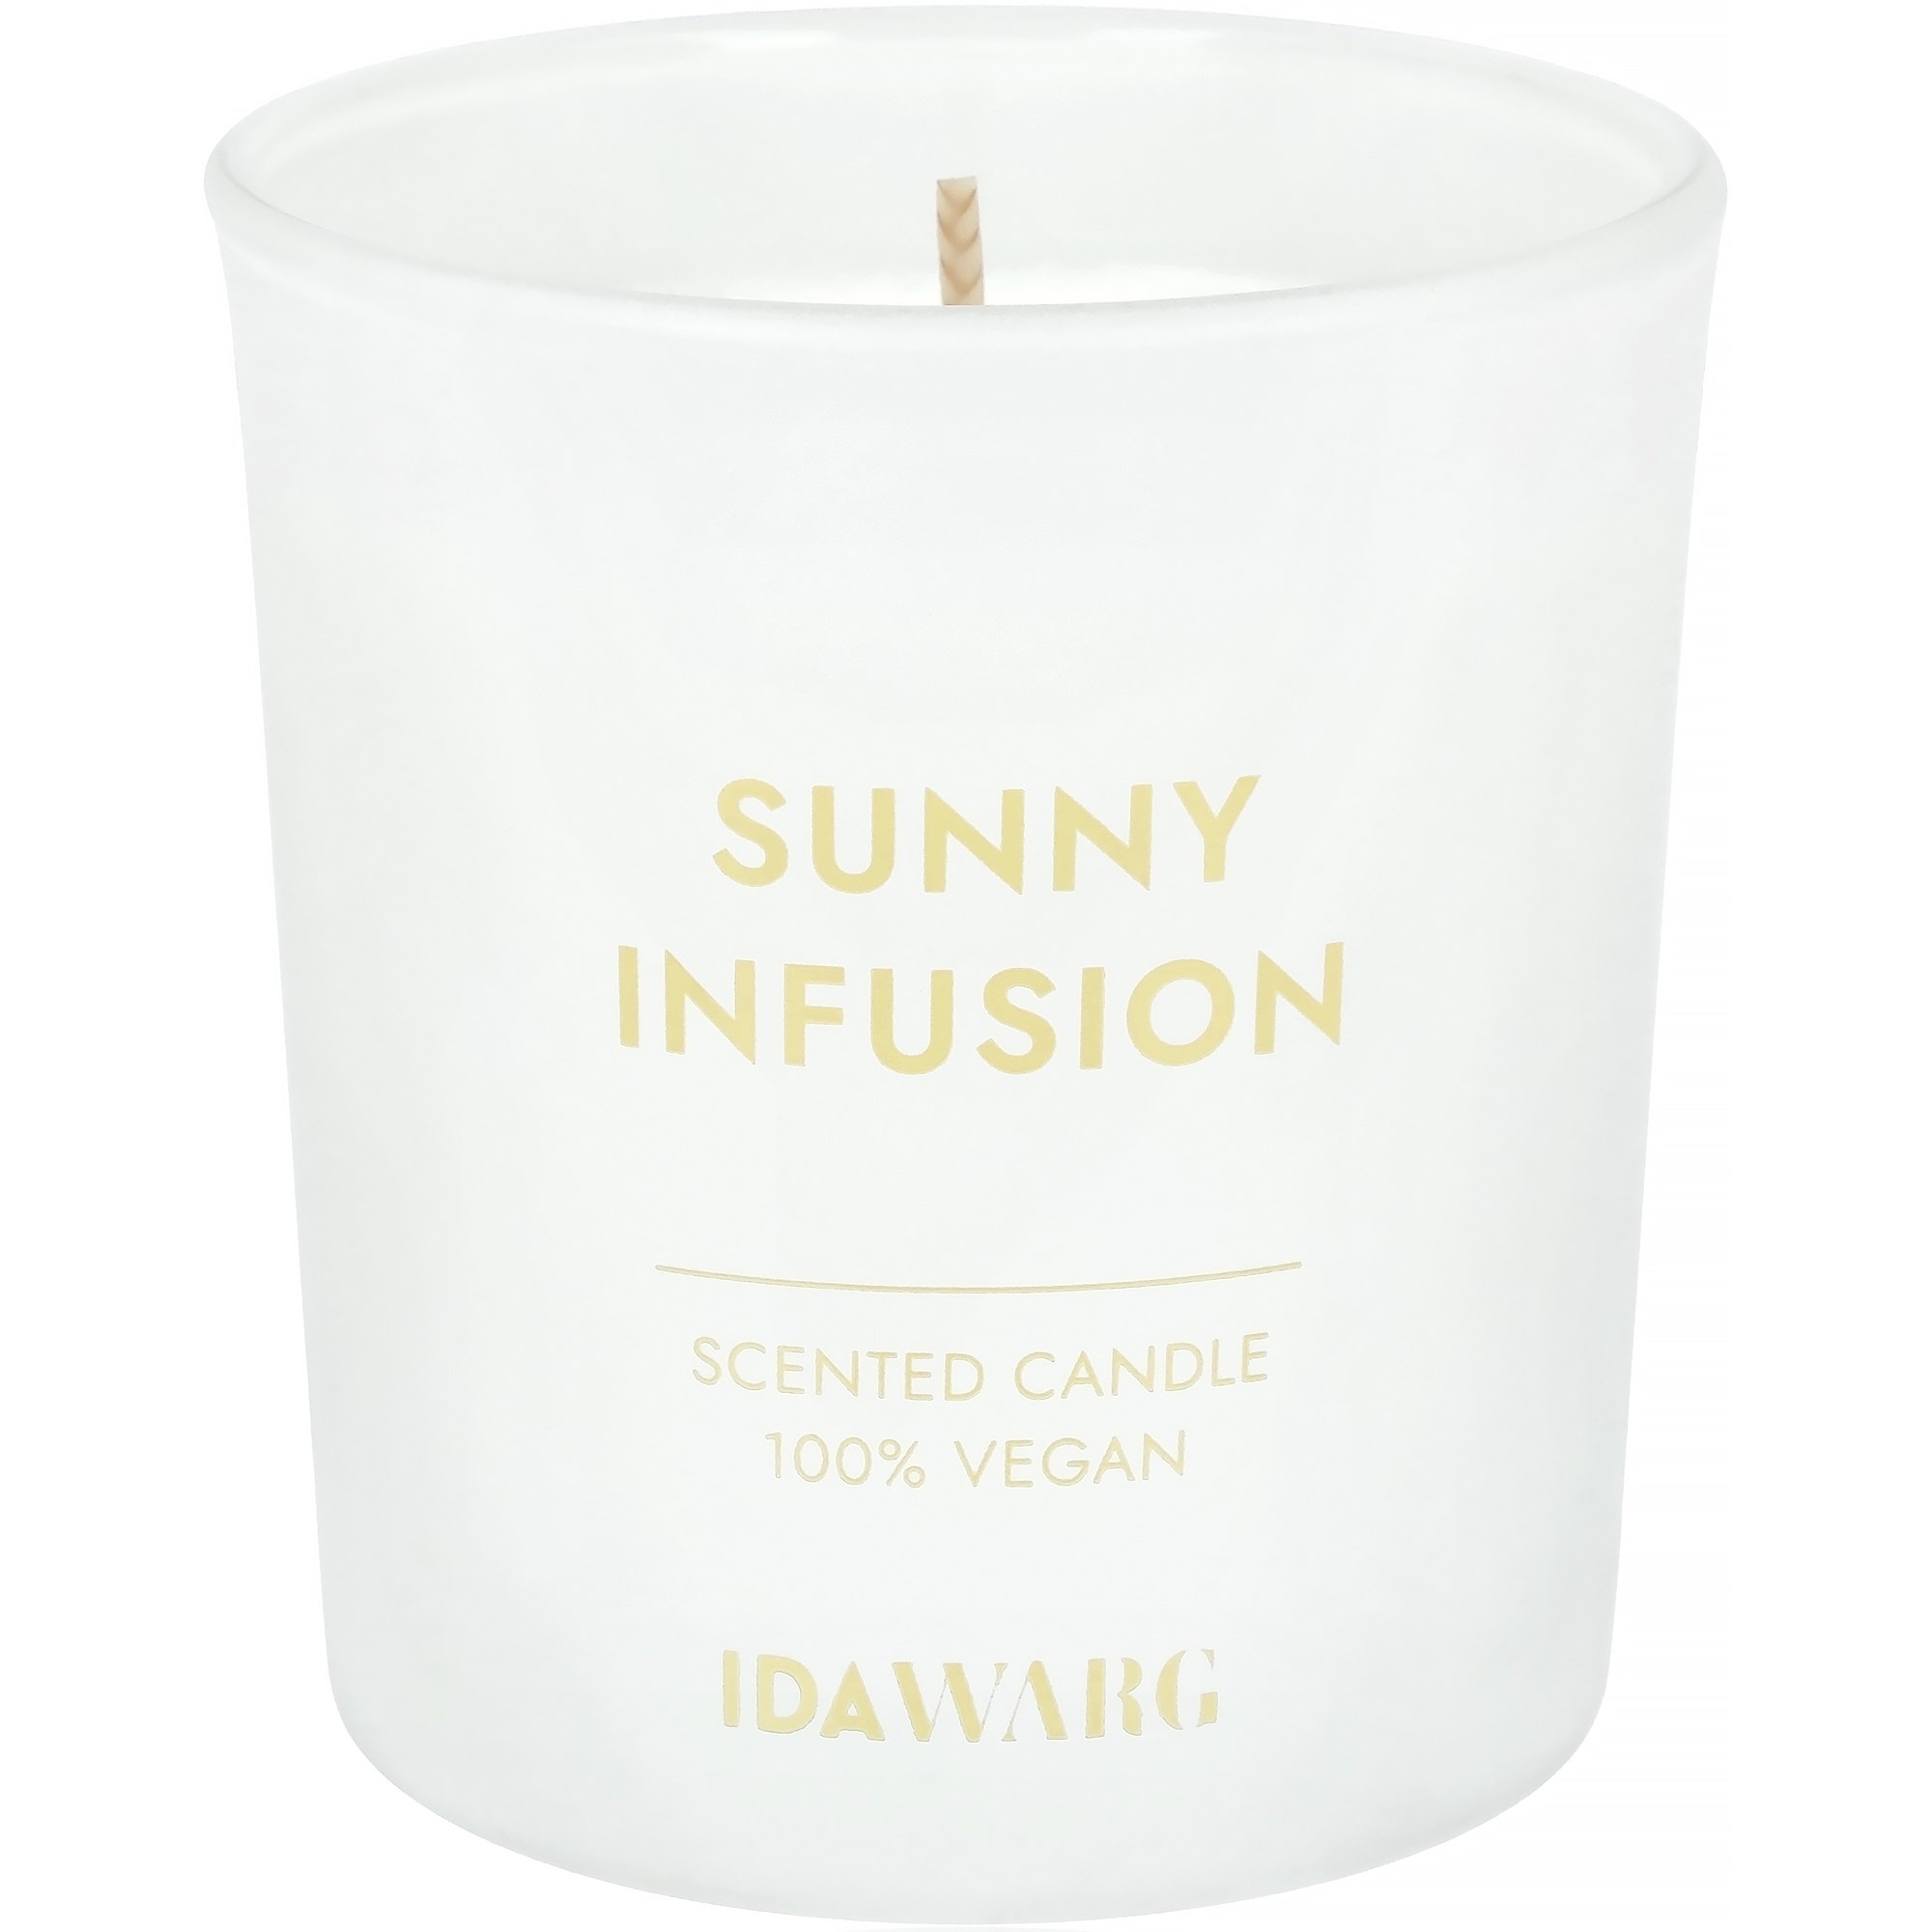 Ida Warg Sunny Infusion Scented Candle